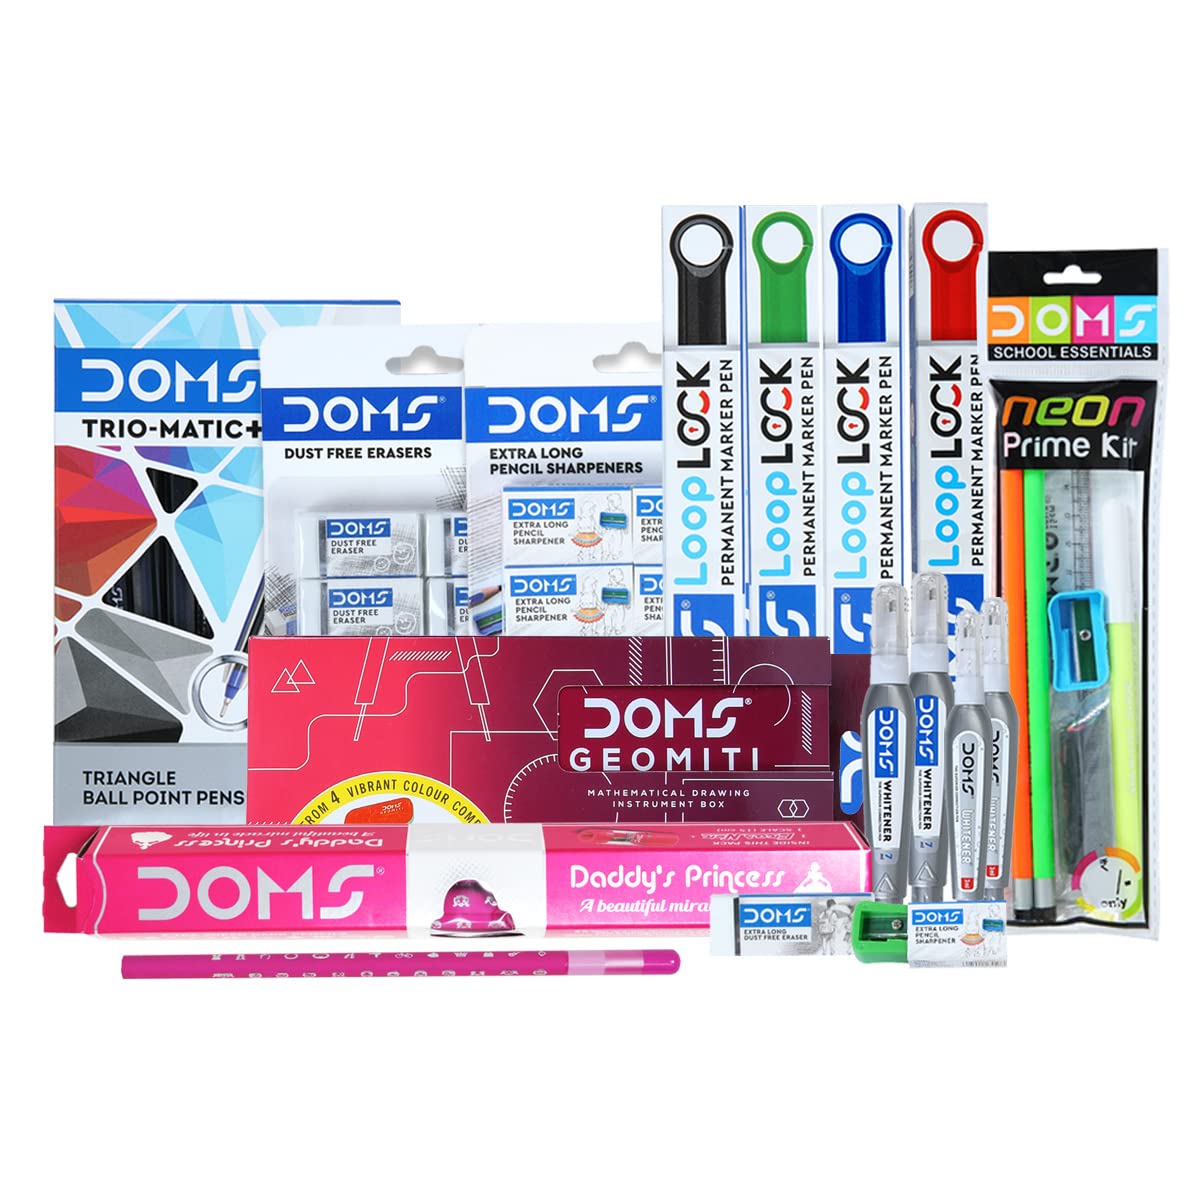 DOMS School Smart Kit for Girls | Best for School, College & Office | 52 Assorted Items | Graphite Pencil, Ball Pens, Geometry Box | DOMS Stationery | Stationery Items for School & Office